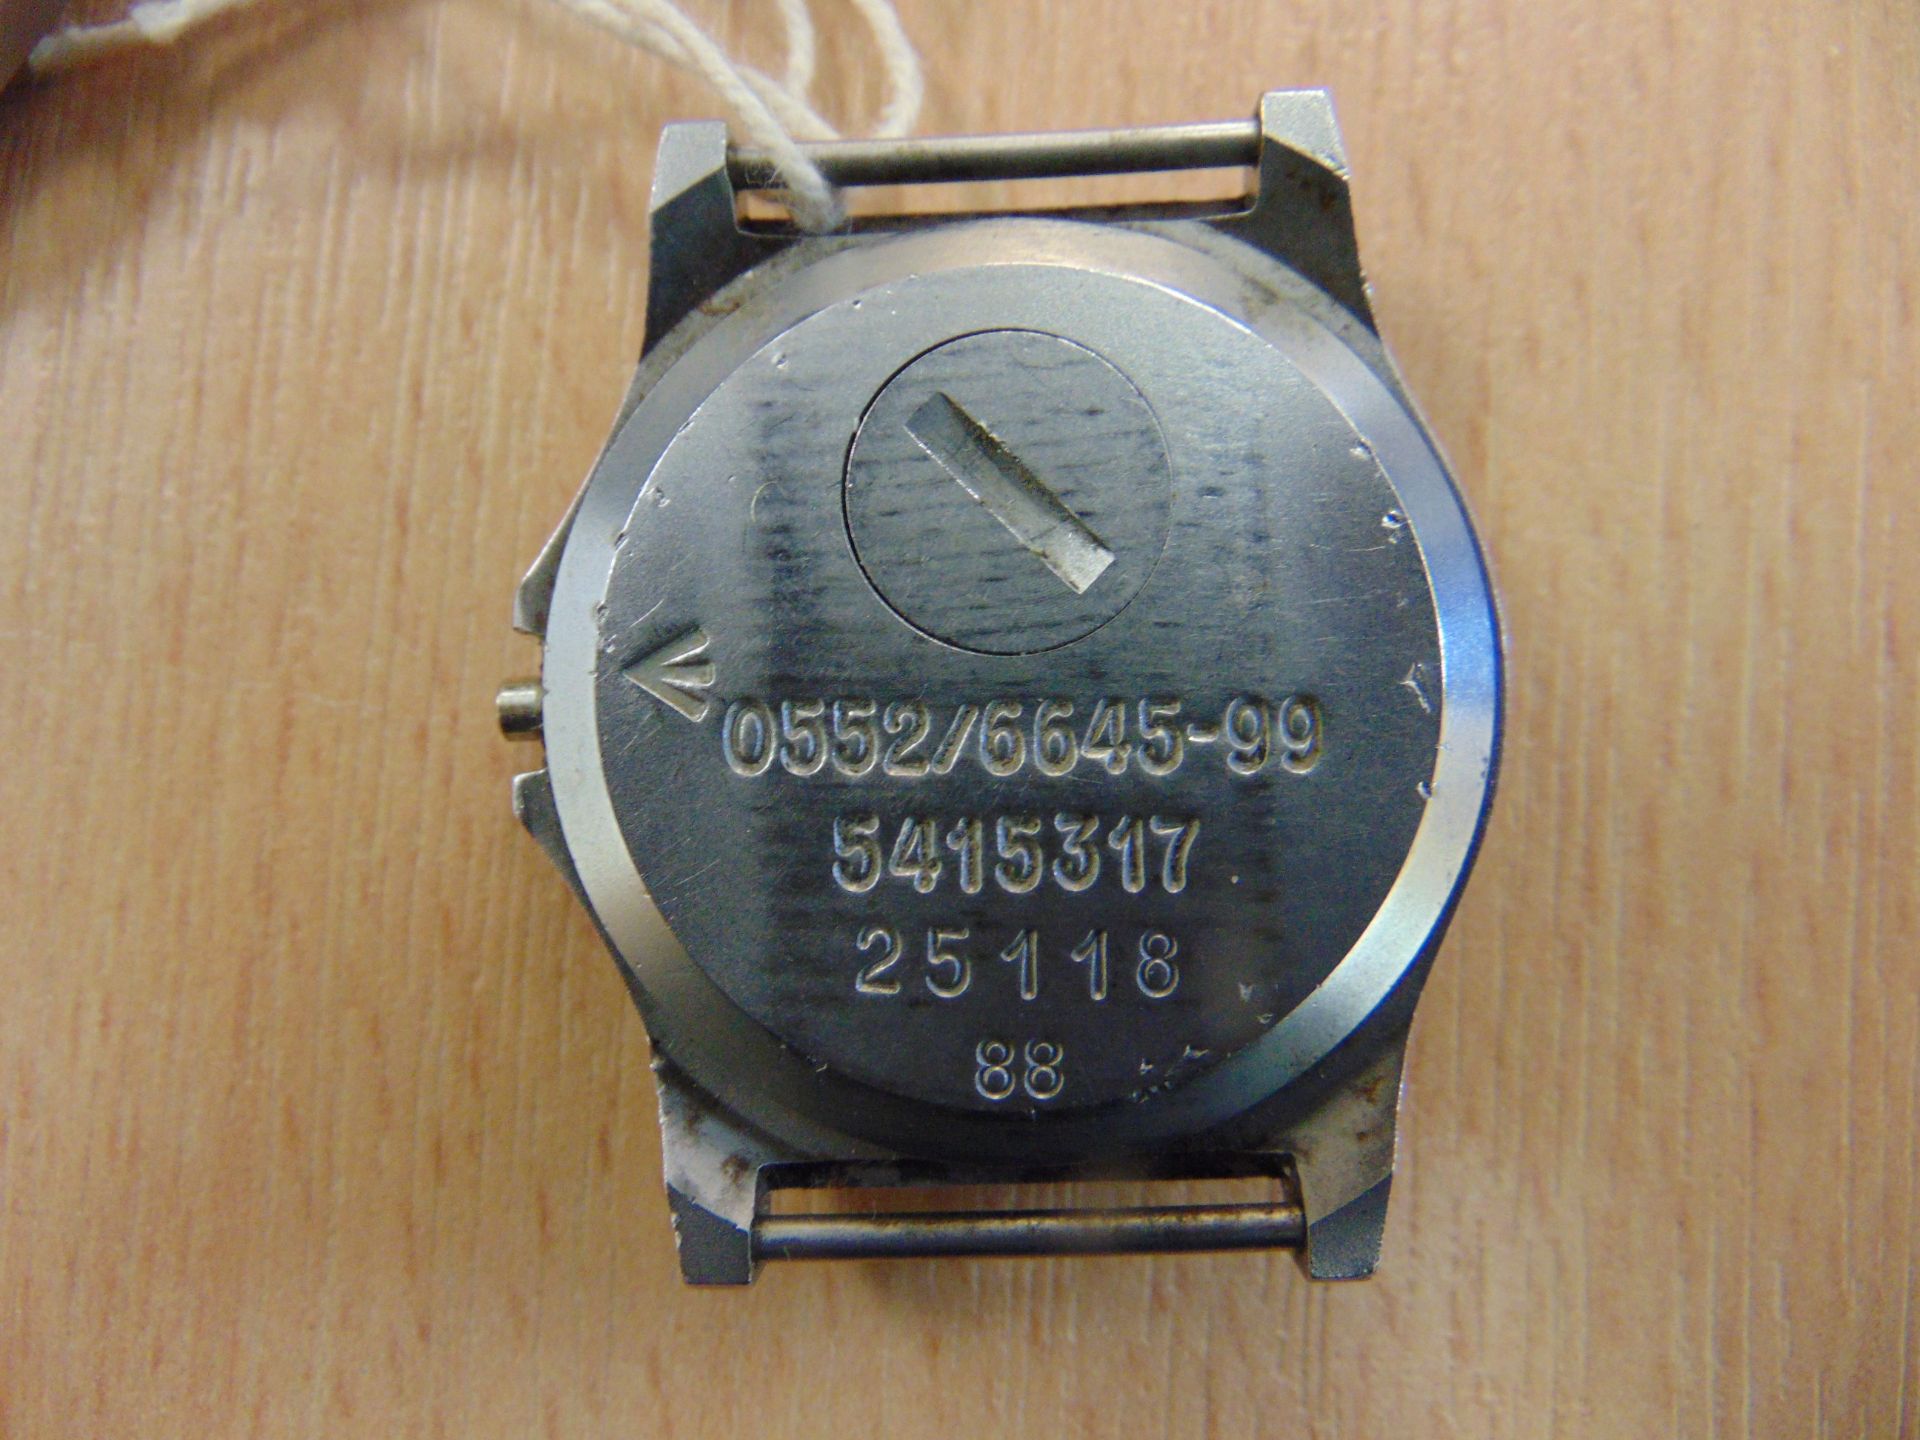 2X CWC 0552 ROYAL MARINES ISSUE SERVICE WATCHES NATO MARKED DATE: 1988/89 - SPARES/ REPAIR - Image 8 of 9